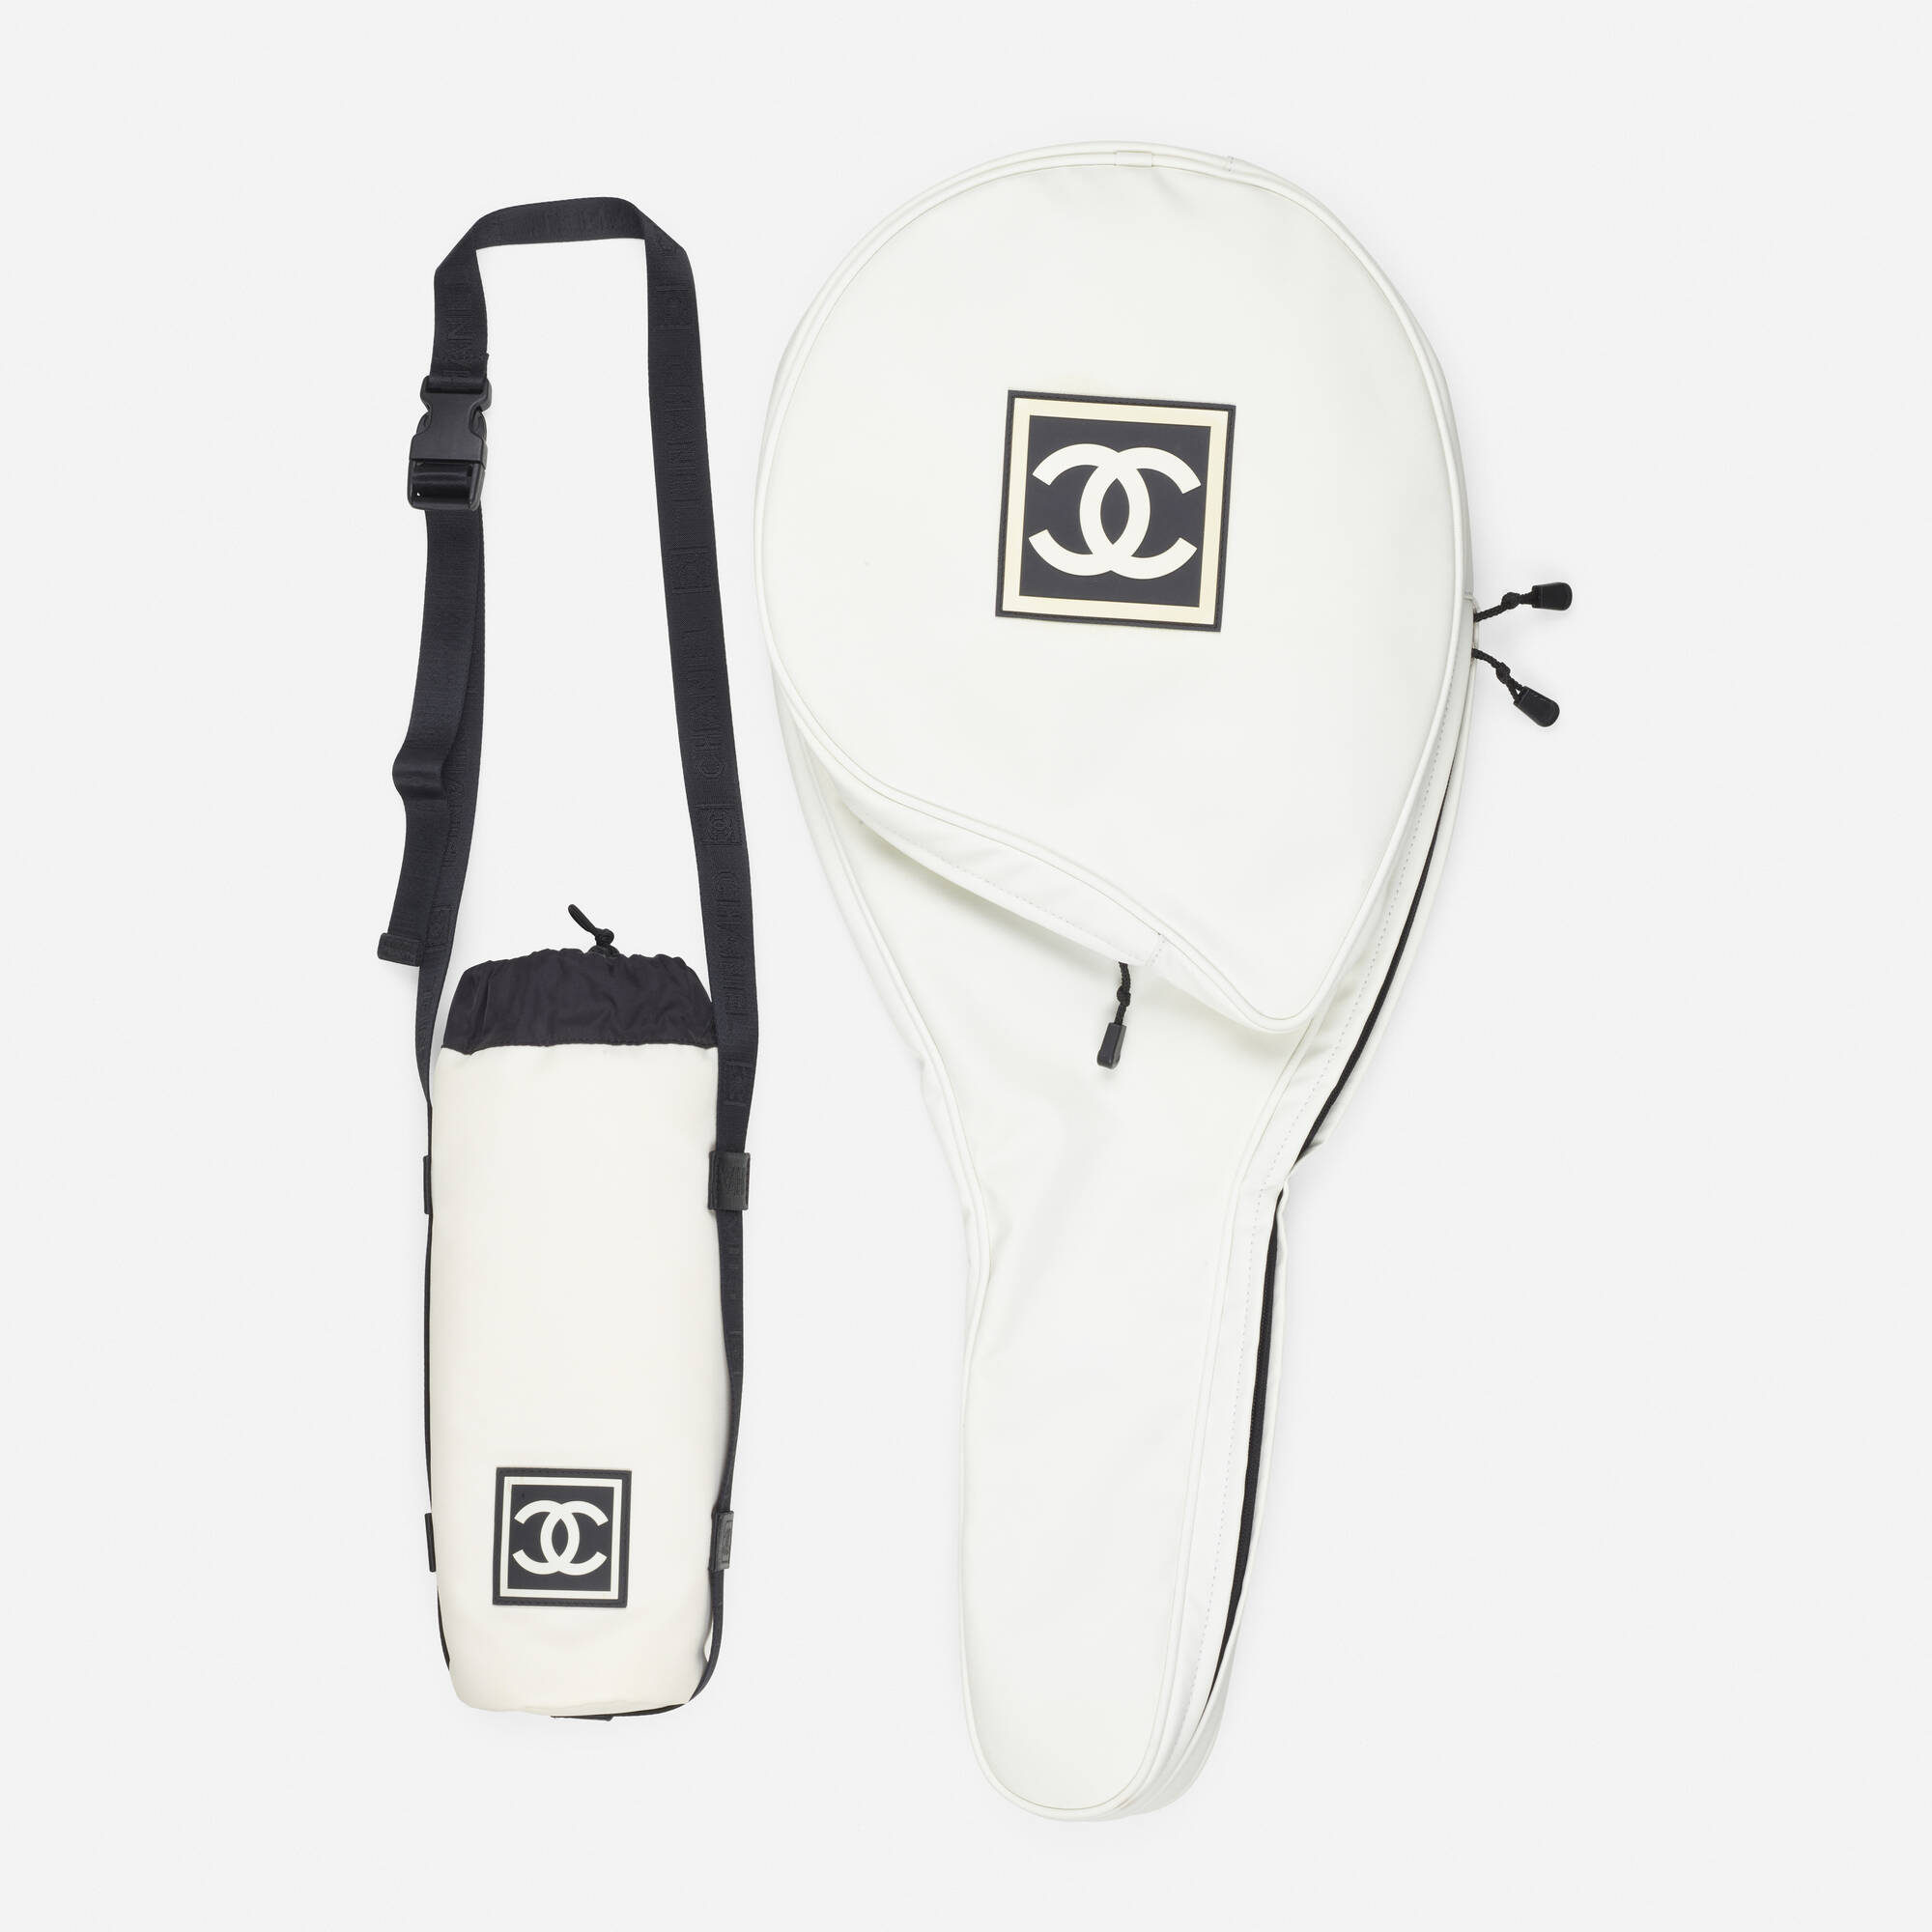 Chanel, tennis racket cover and water bottle holder sold at auction on 29th  July